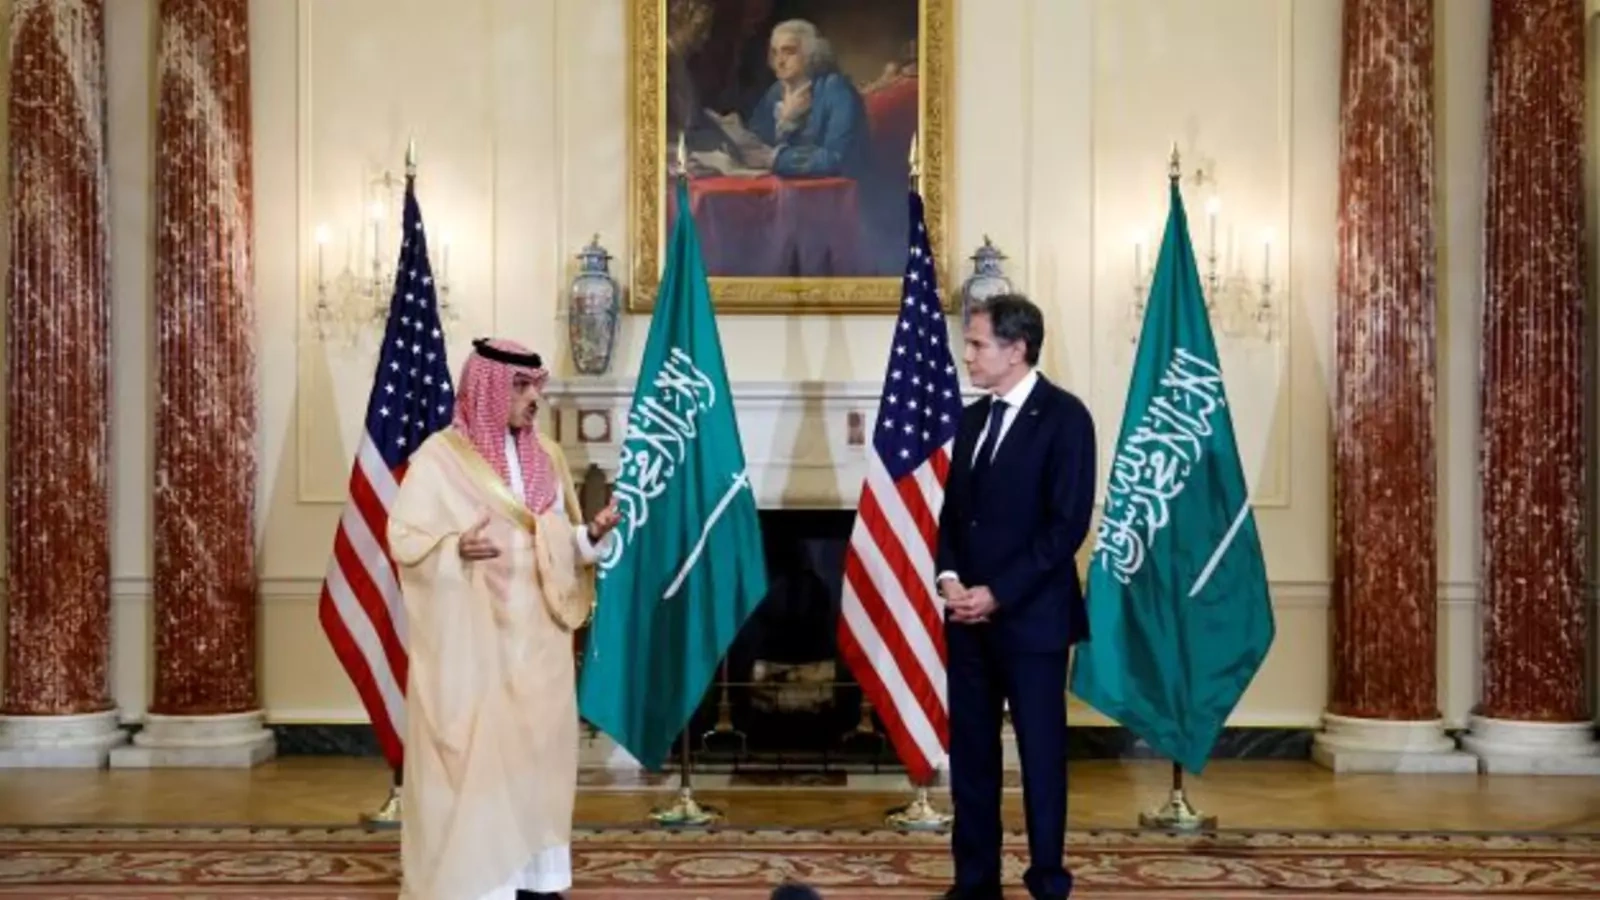 U.S. Secretary of State Antony Blinken and Saudi Arabia's Foreign Minister Faisal bin Farhan Al-Saud deliver remarks to reporters before meeting at the State Department in Washington, U.S., October 14, 2021